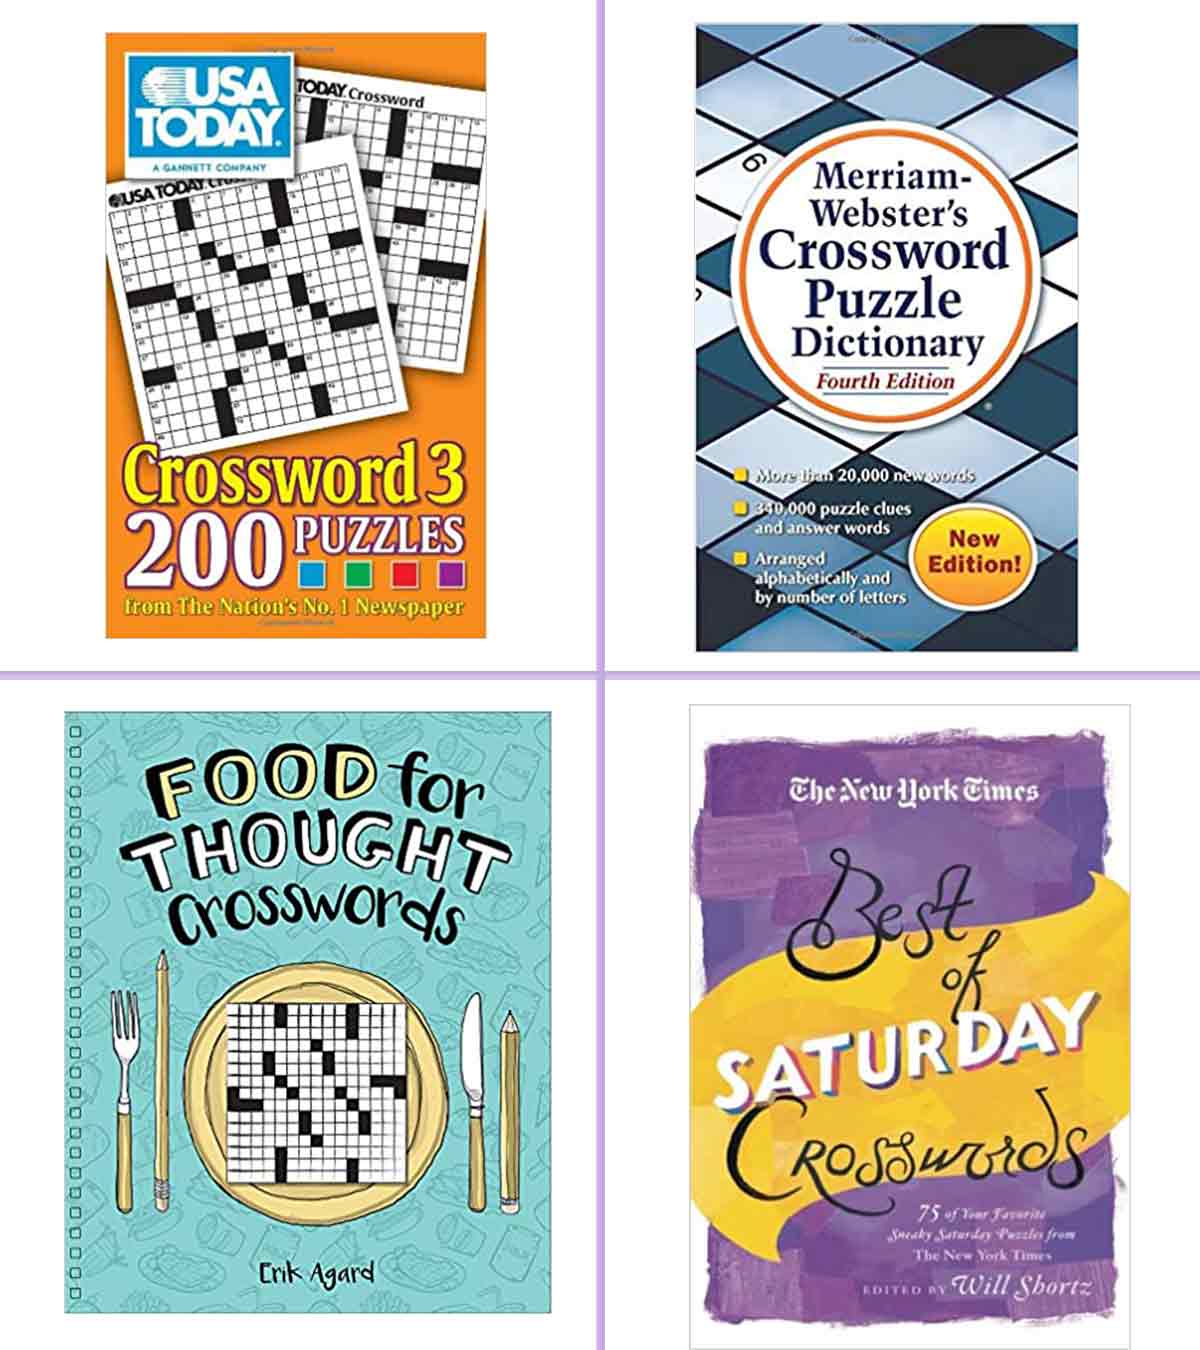 Brain games: Crossword puzzles and artistic hobbies can lower